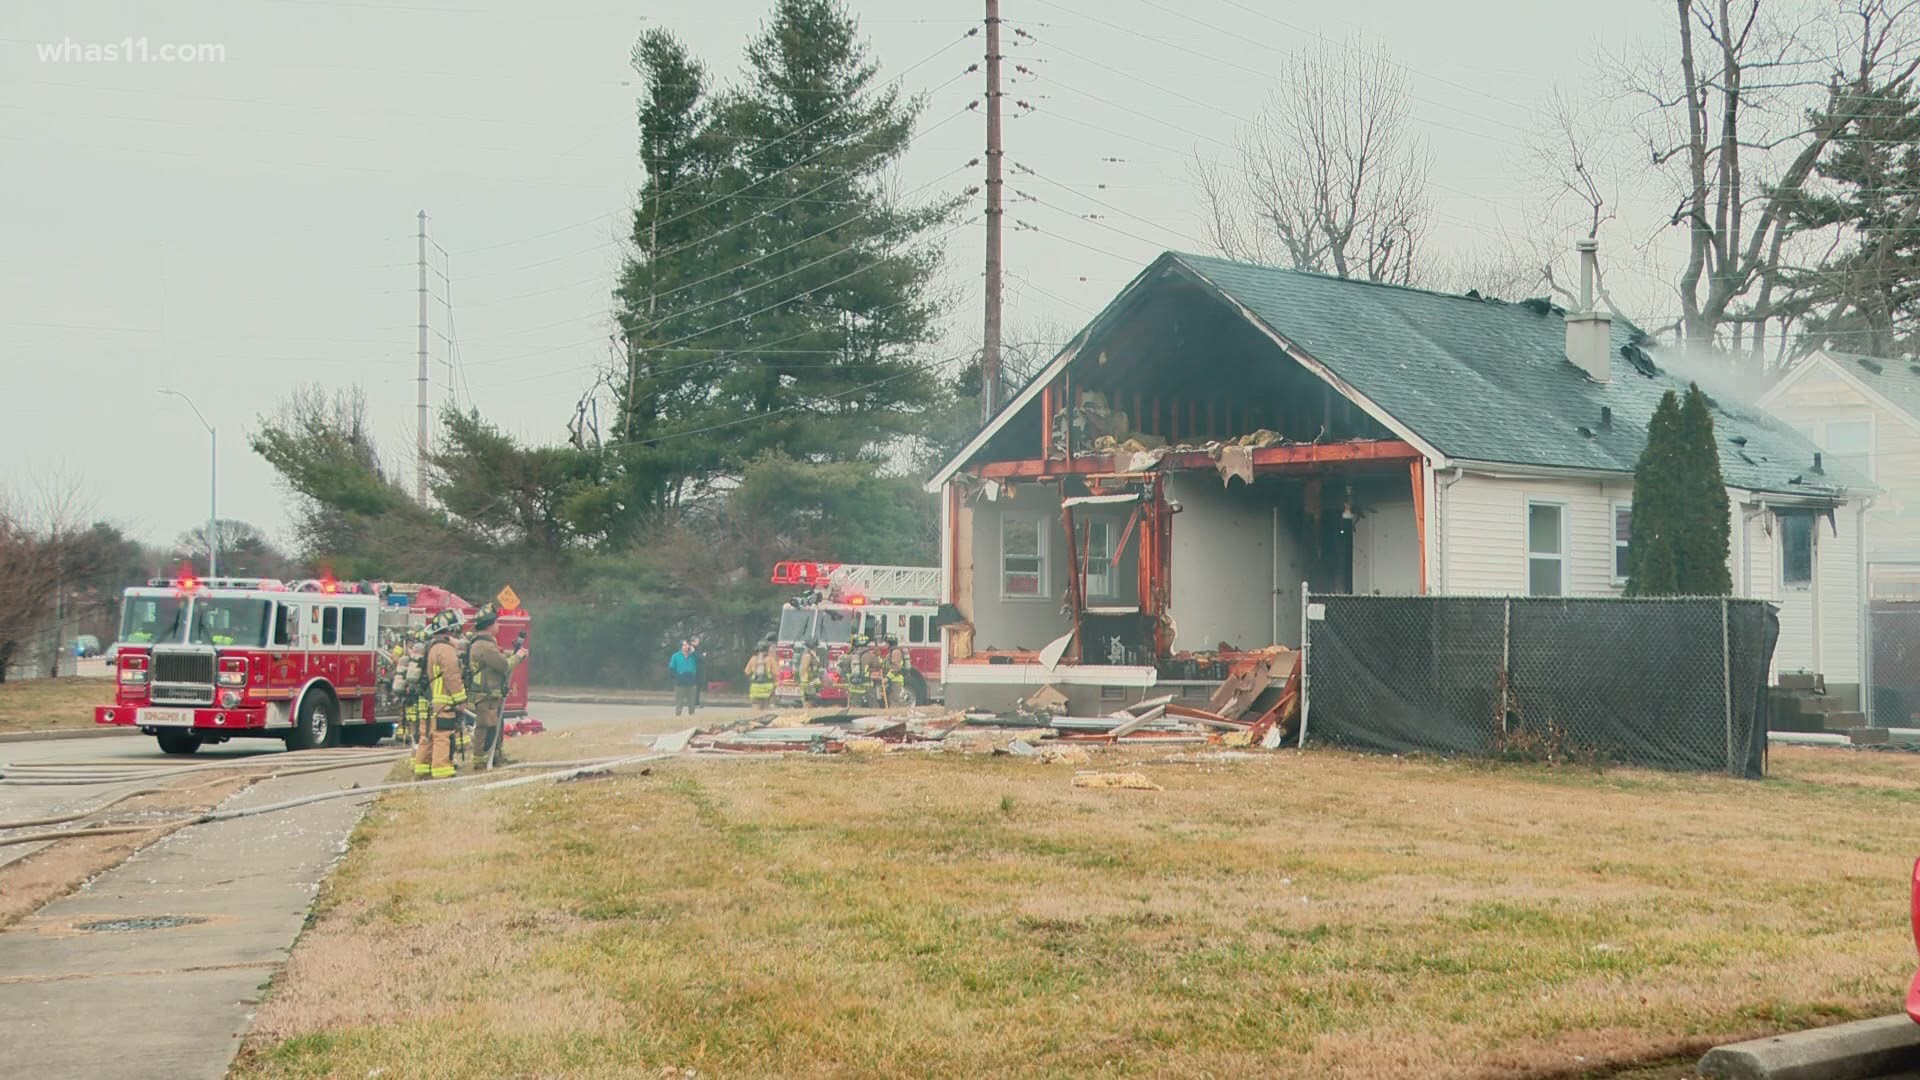 Louisville Fire said the home was vacant and no was injured following an explosion and fire at a home in the Bon Air neighborhood.